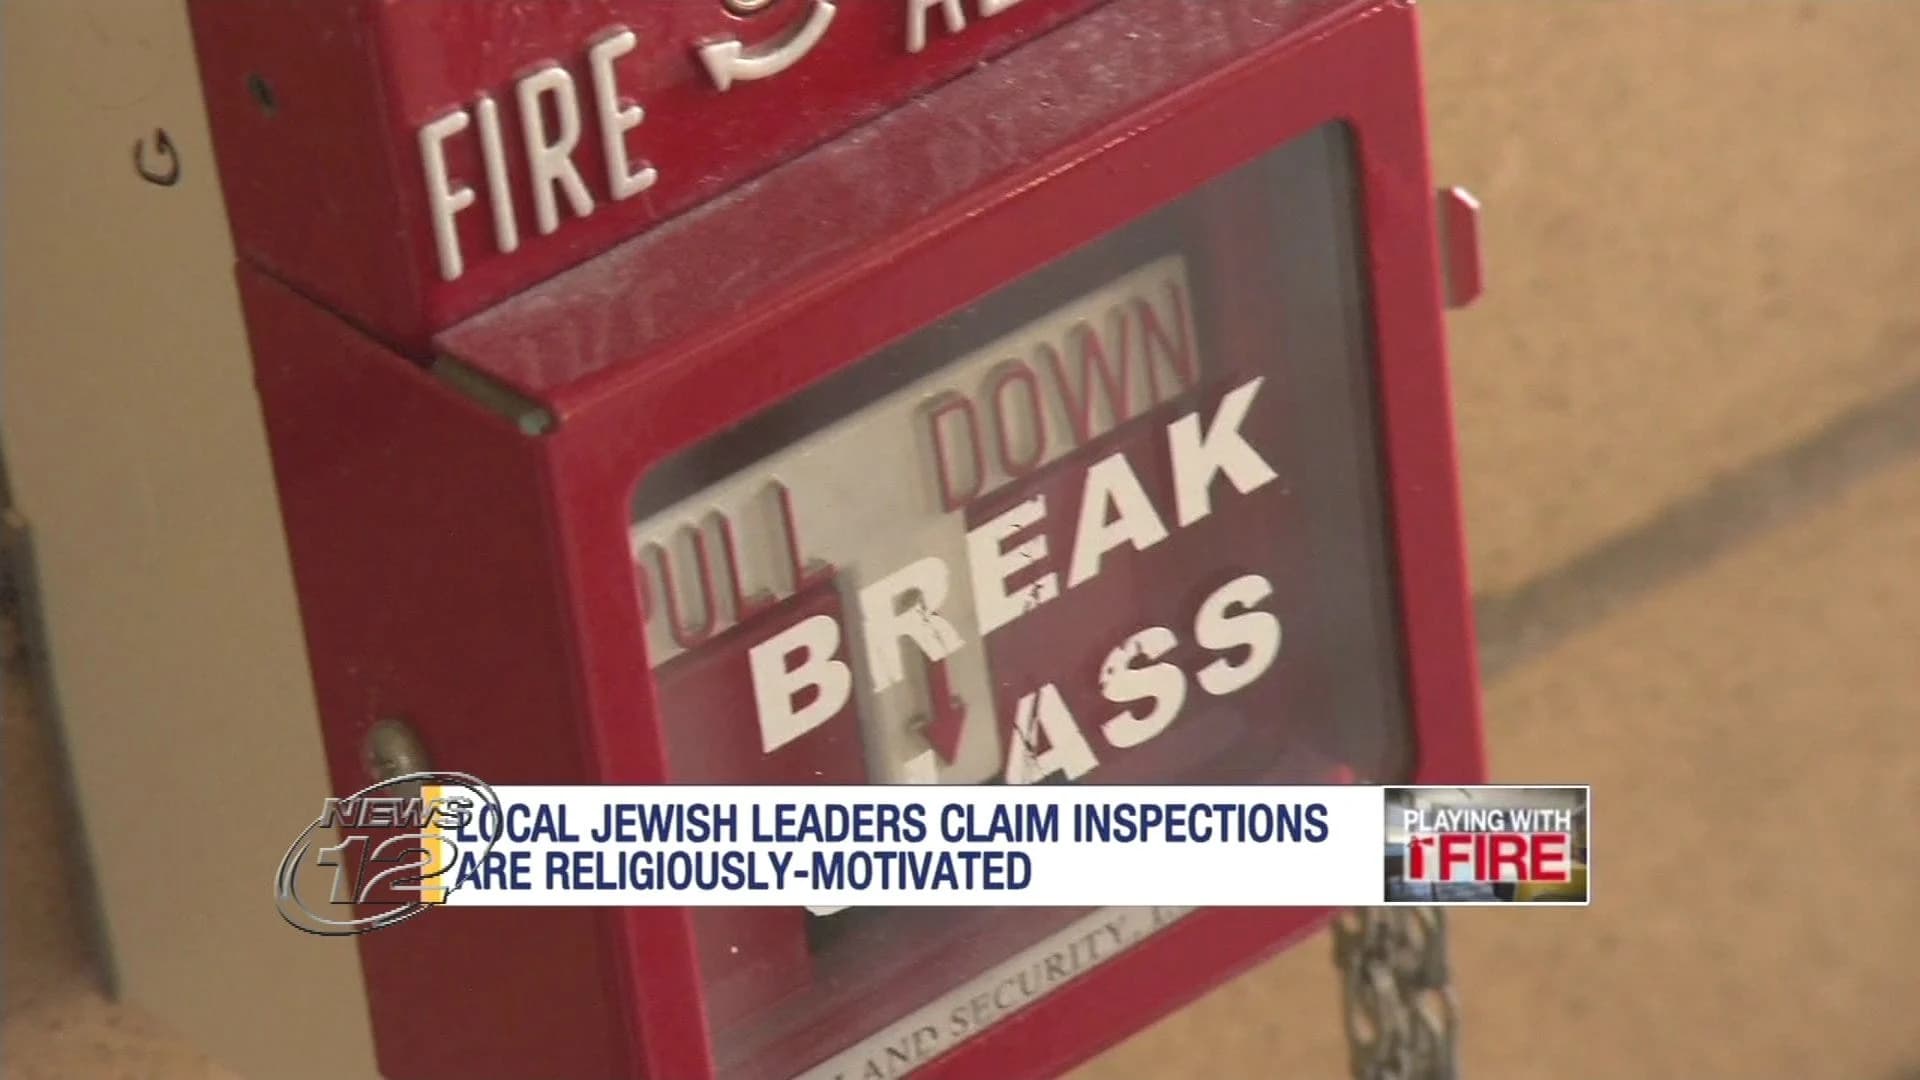 School leaders claim fire inspections fueled by religious bias